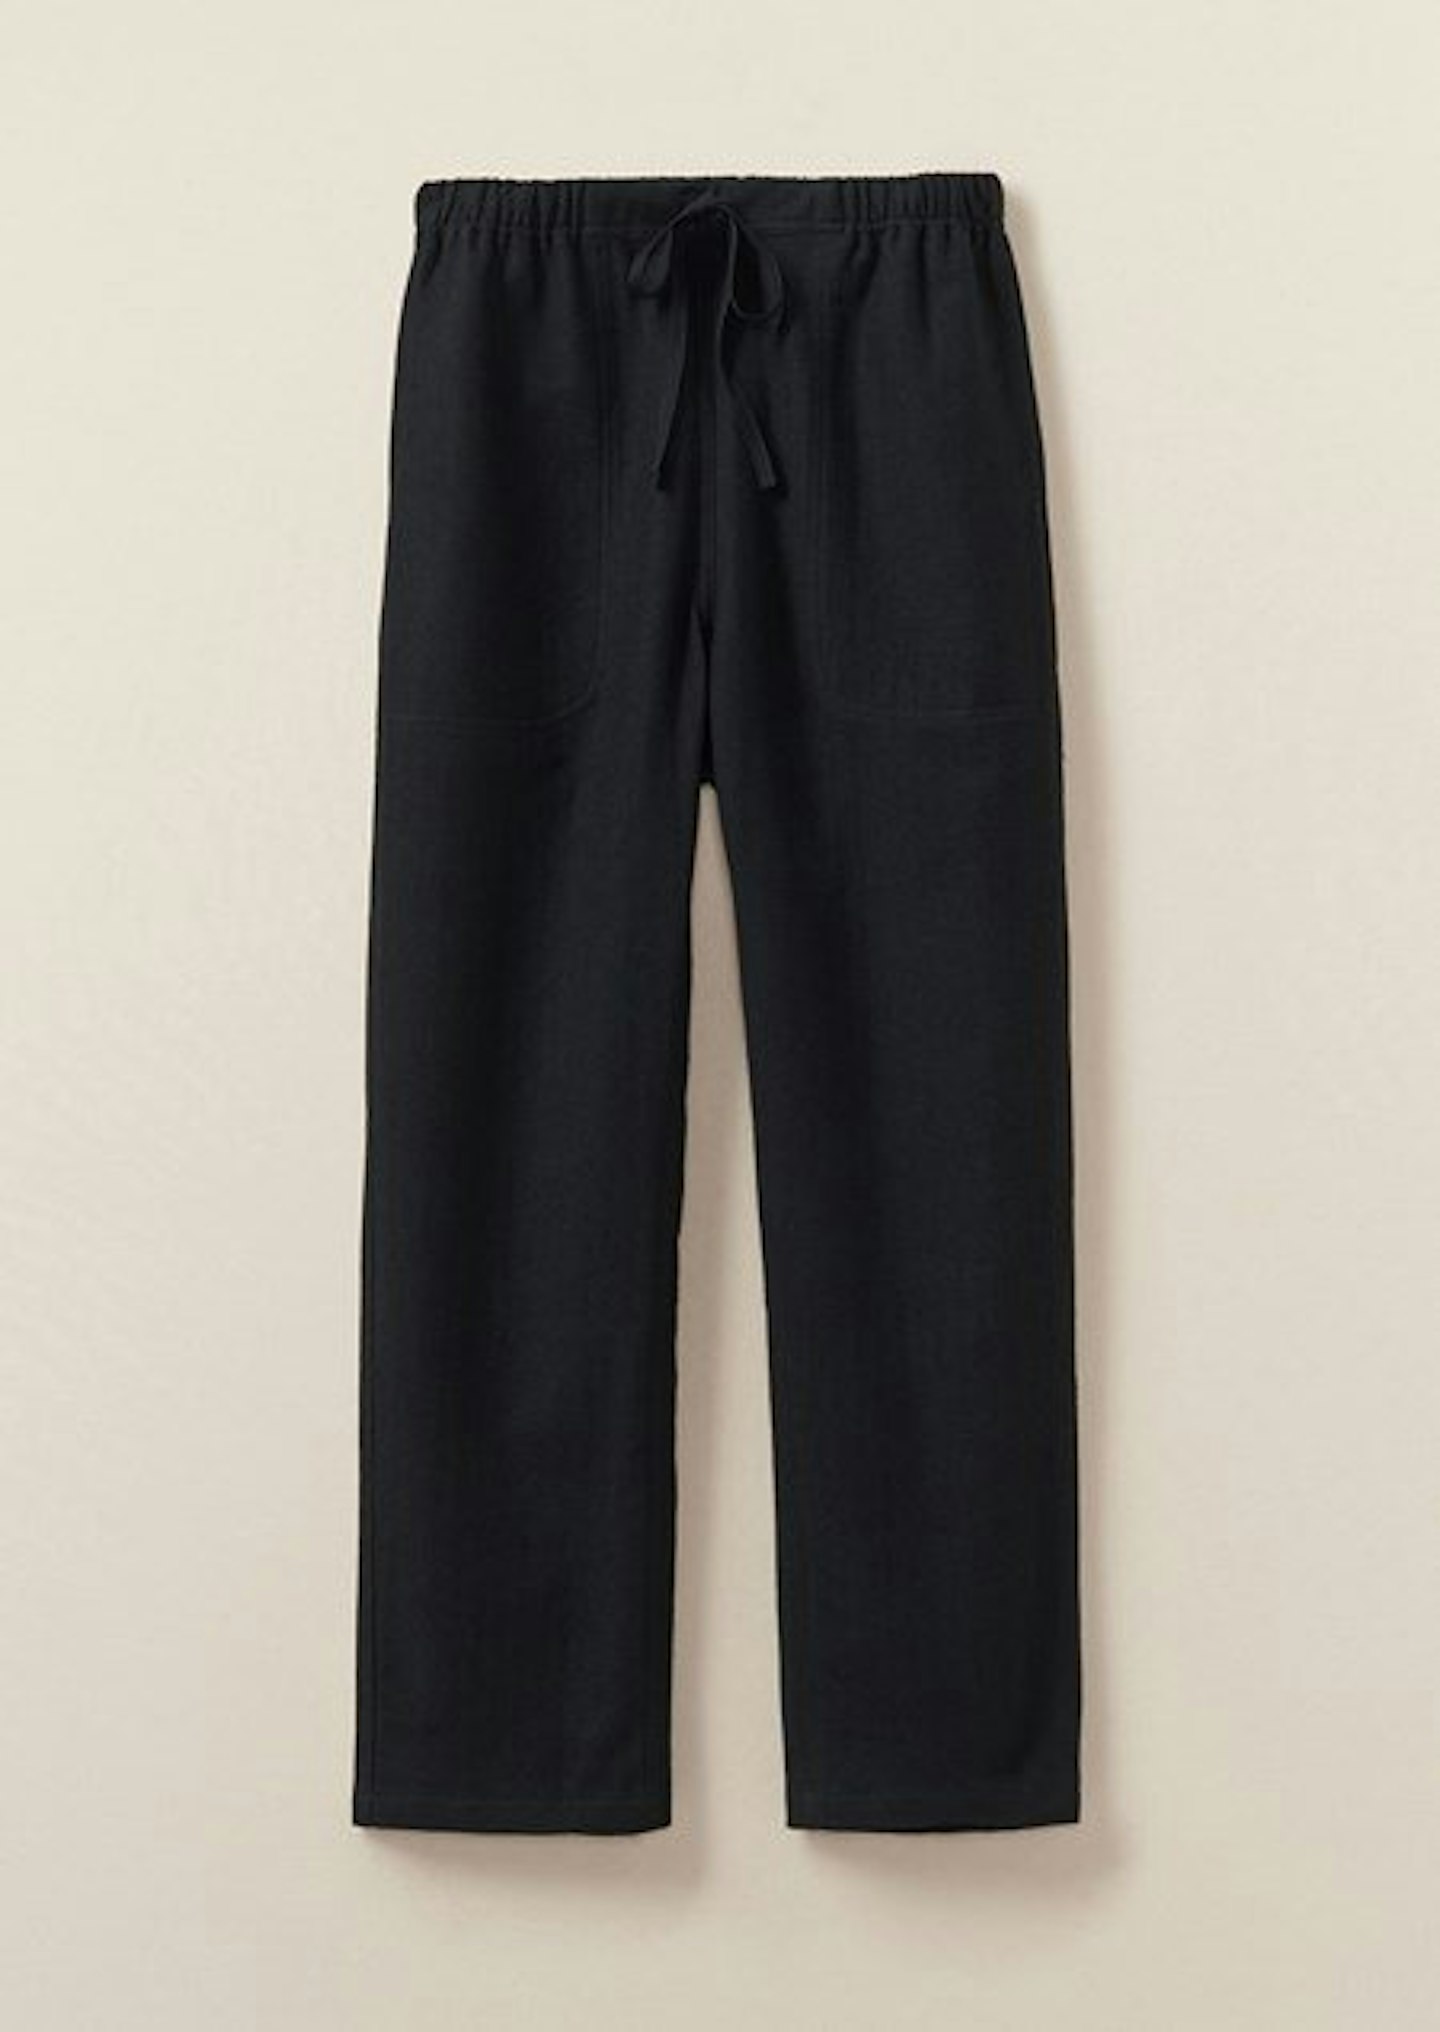 TOAST, Cotton Mix Trousers, £175